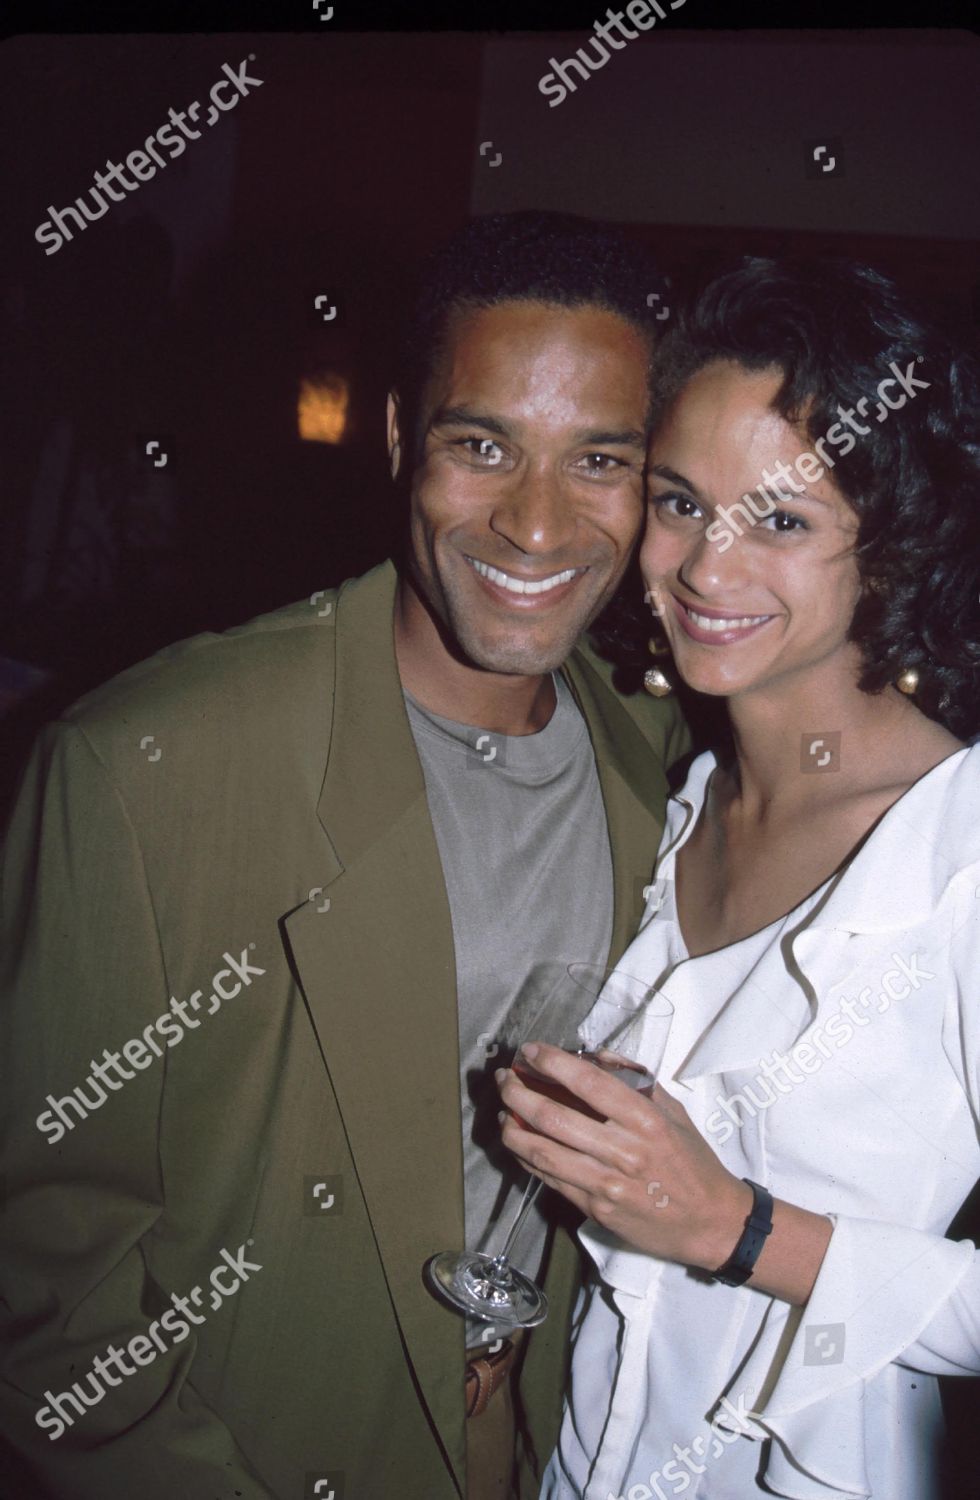 14+ Top Photos of Anne Marie Johnson - Swanty Gallery